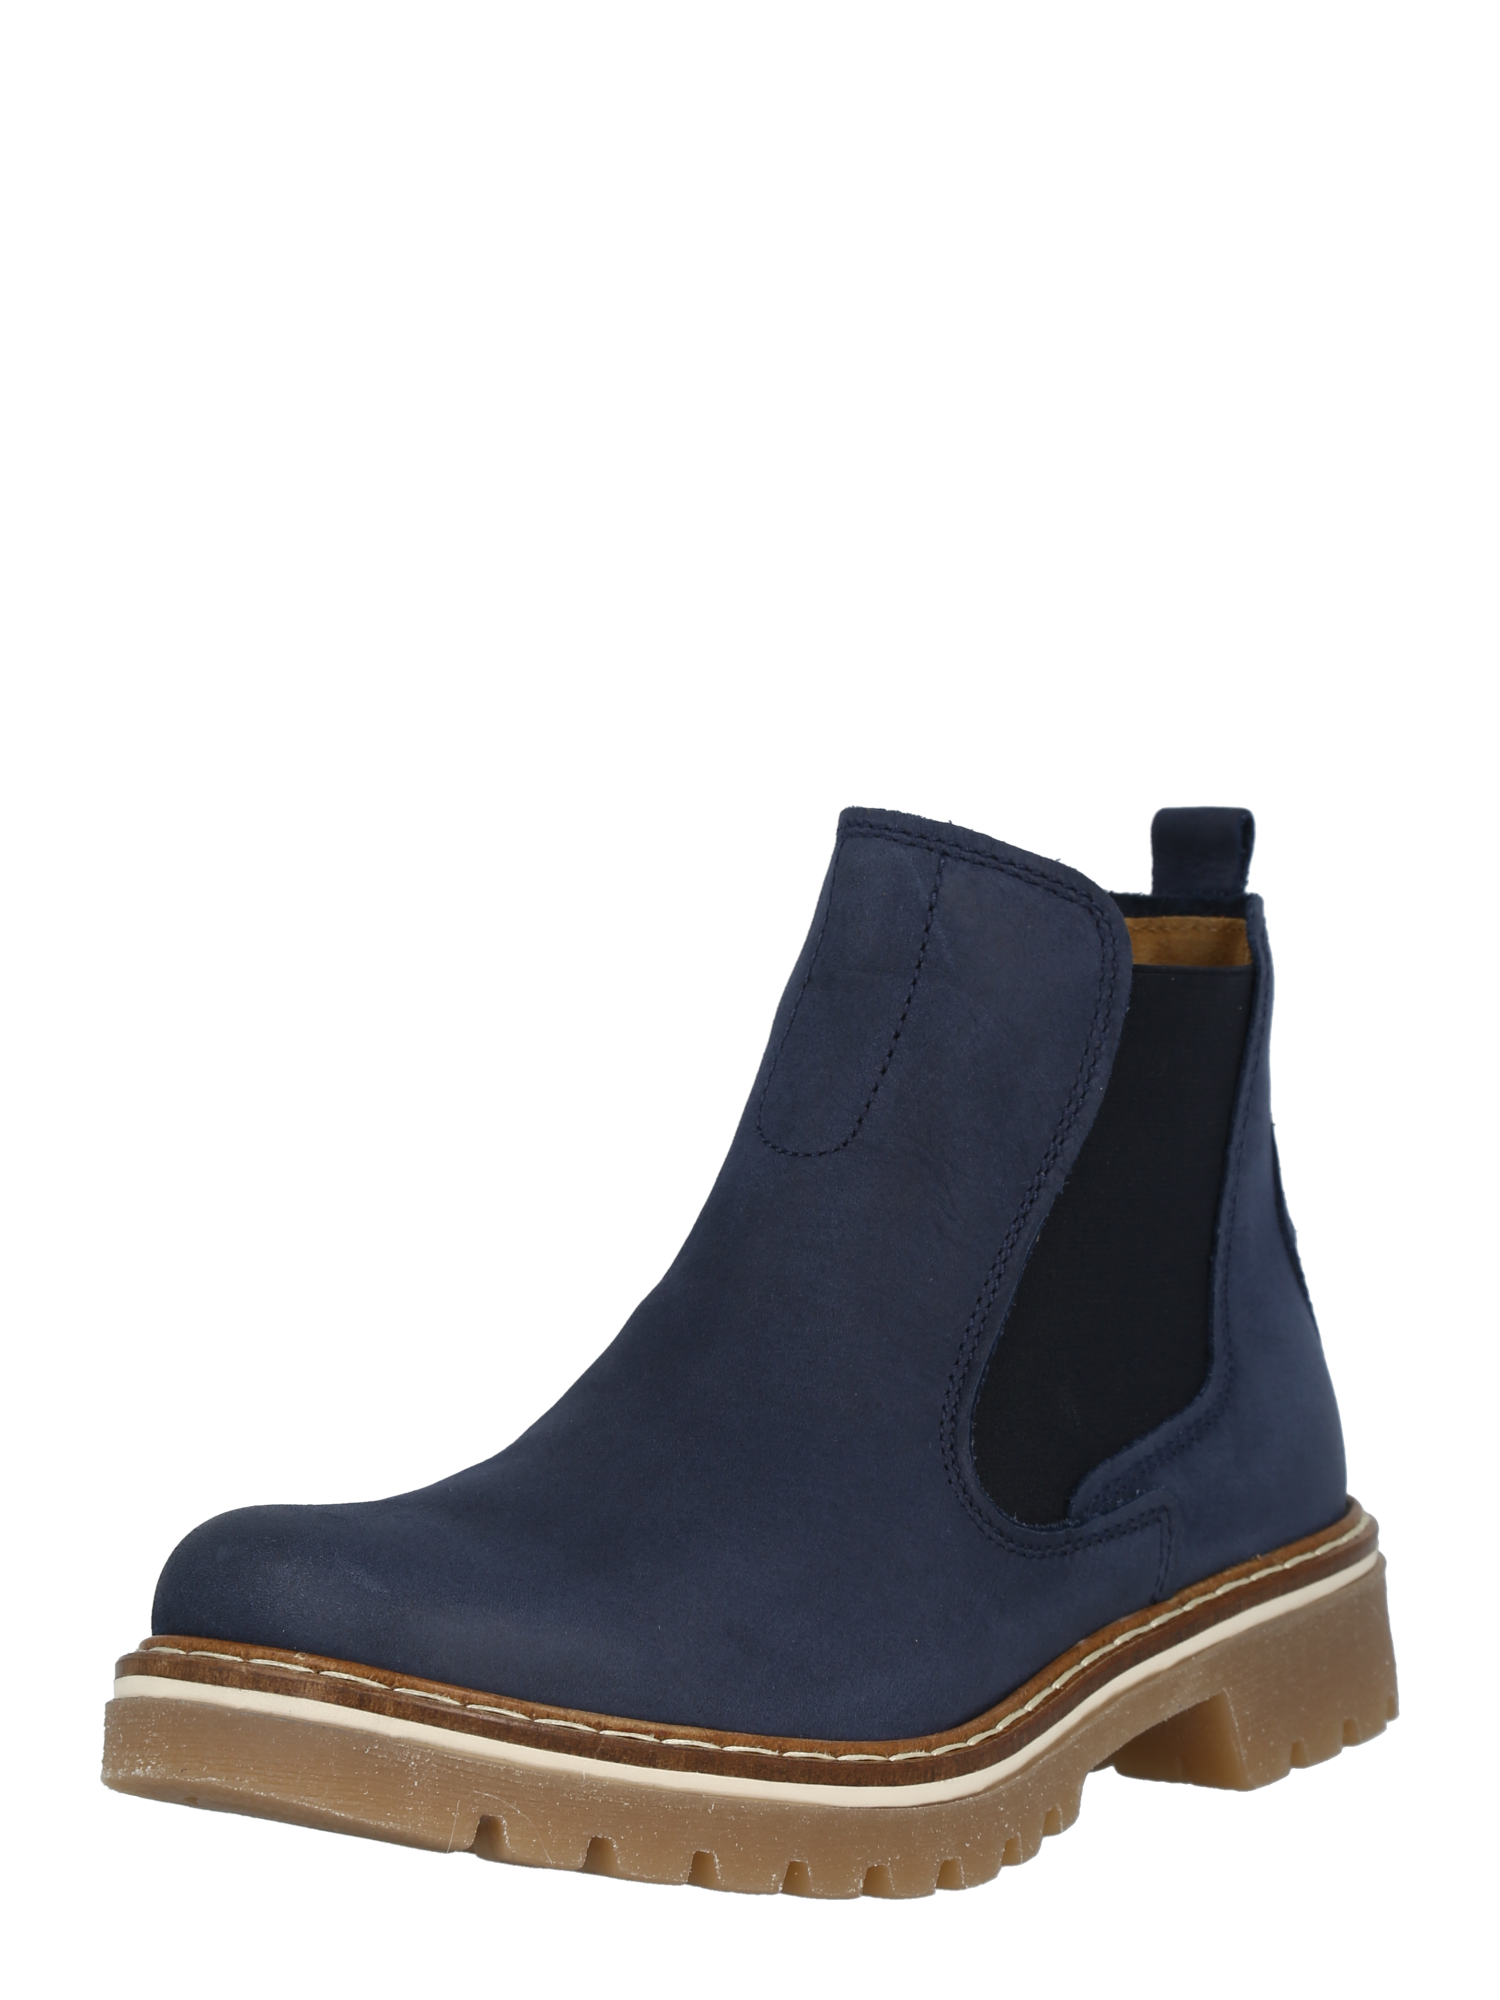 jE6xY Donna GABOR Boots chelsea in Navy, Blu Notte 